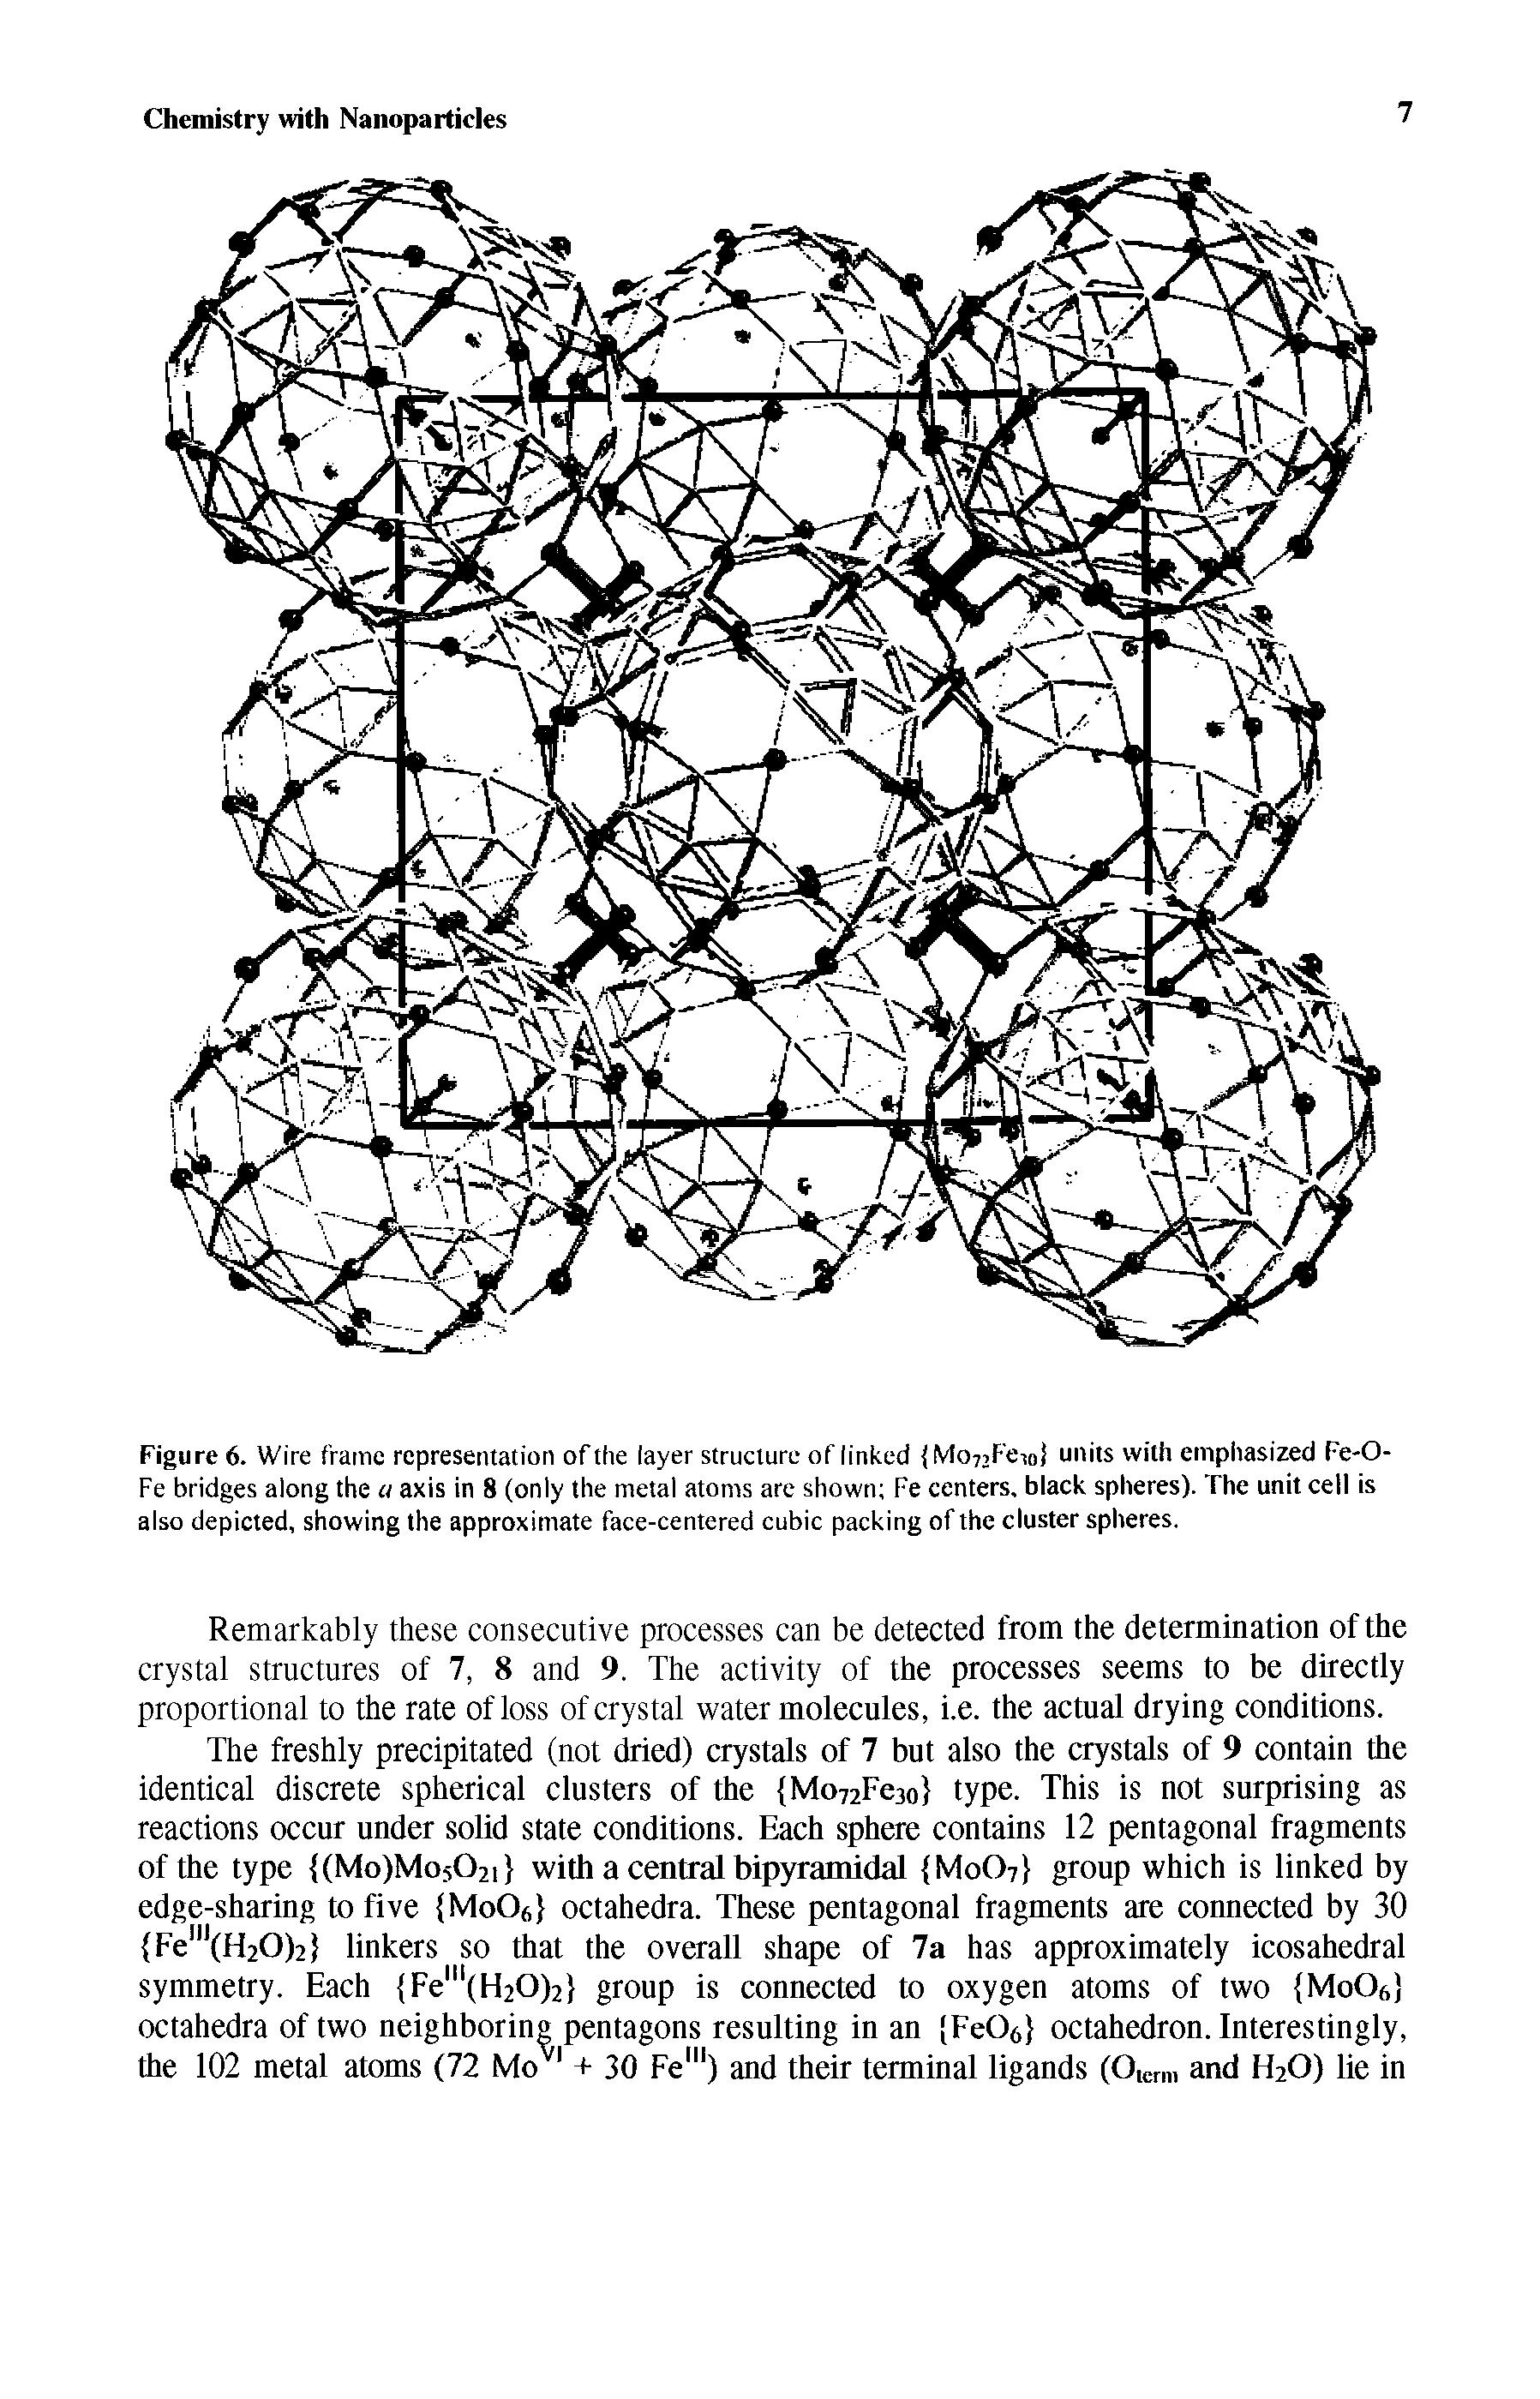 Figure 6. Wire frame representation of the layer structure of linked Mo72Feioj units with emphasized Fe-O-Fe bridges along the a axis in 8 (only the metal atoms are shown Fe centers, black spheres). The unit cell is also depicted, showing the approximate face-centered cubic packing of the cluster spheres.